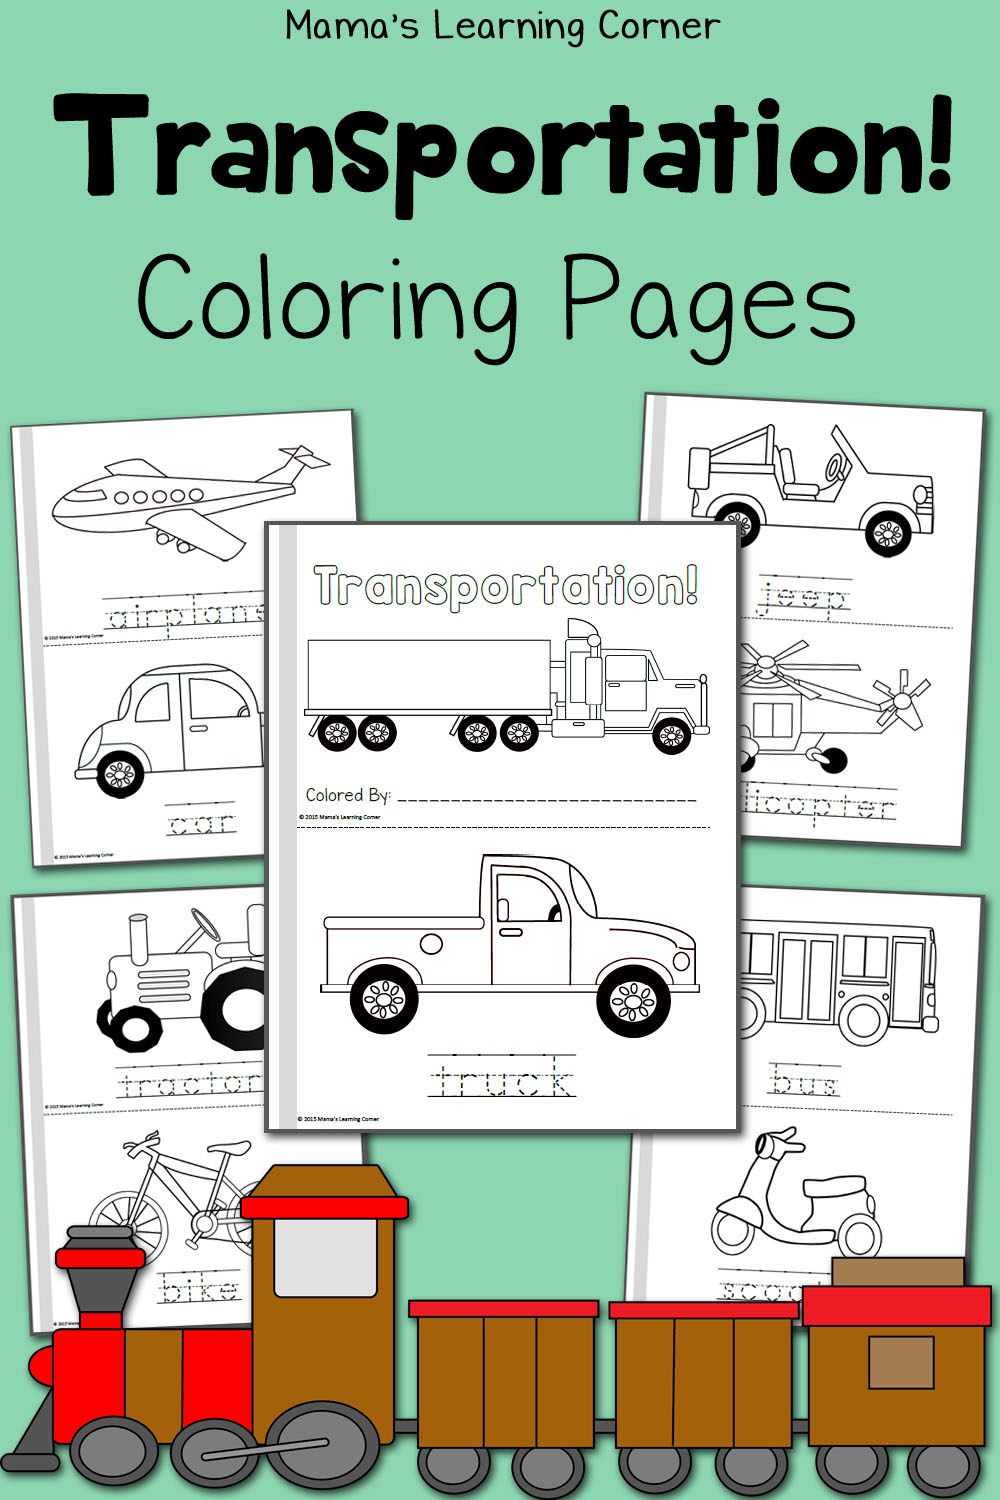 Transportation Coloring Pages   Mamas Learning Corner